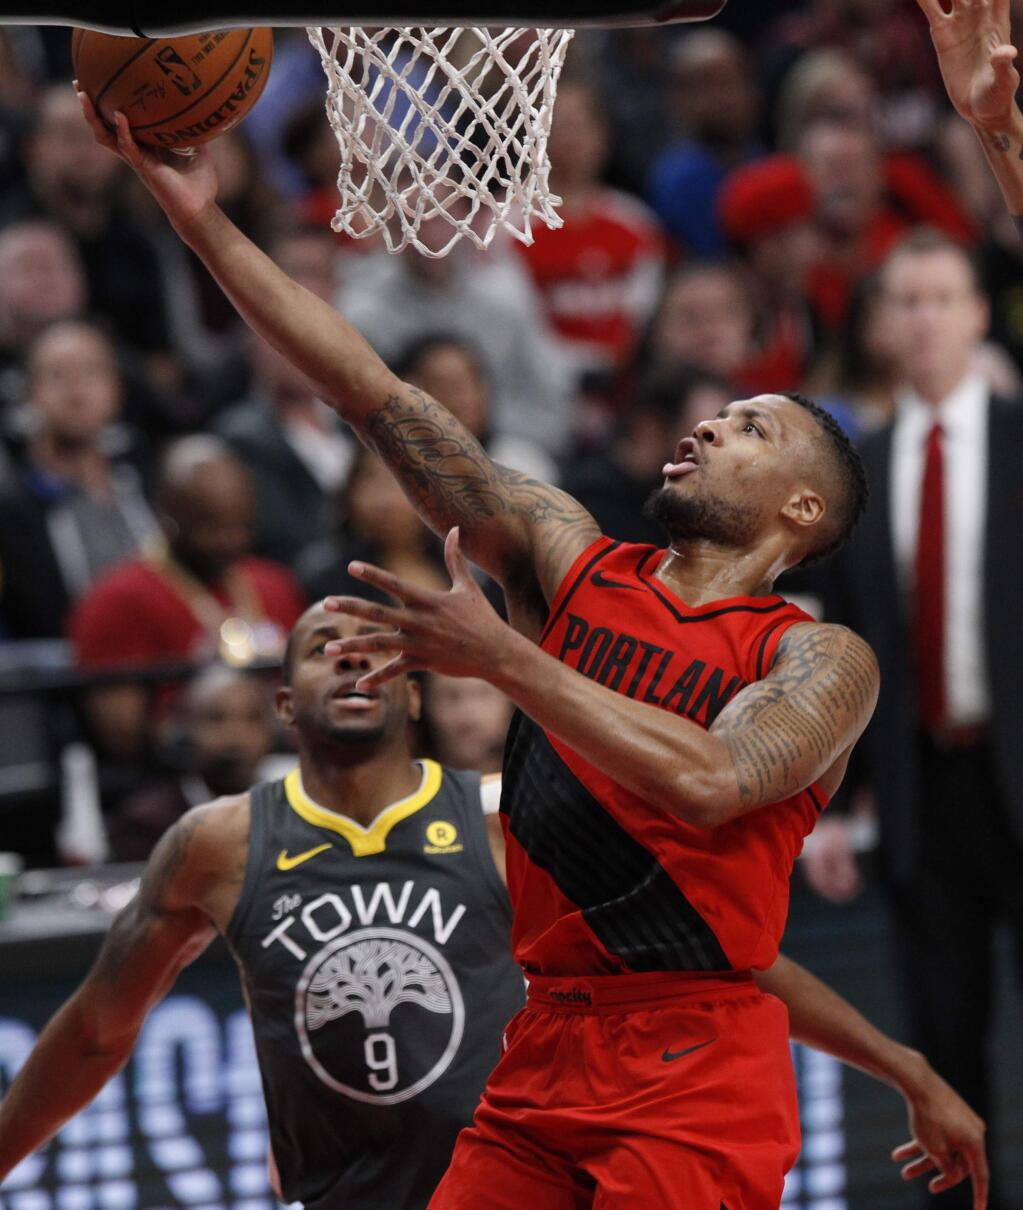 Portland Trail Blazers guard Damian Lillard, right, drives past Golden State Warriors forward Andre Iguodala during the first half in Portland, Ore., Wednesday, Feb. 14, 2018. (AP Photo/Steve Dipaola)